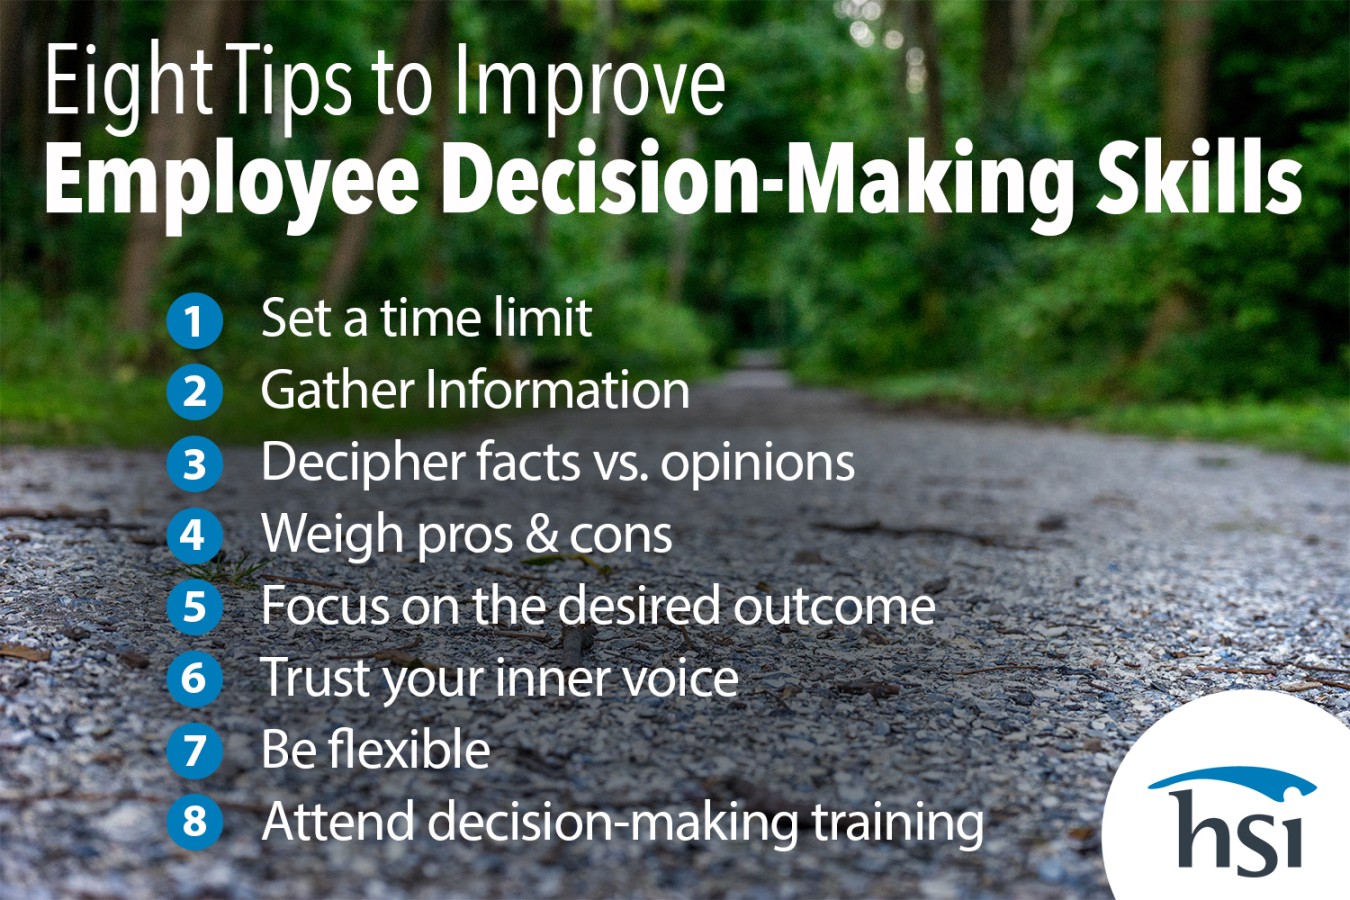 How to Improve Decision-Making Skills - HSI